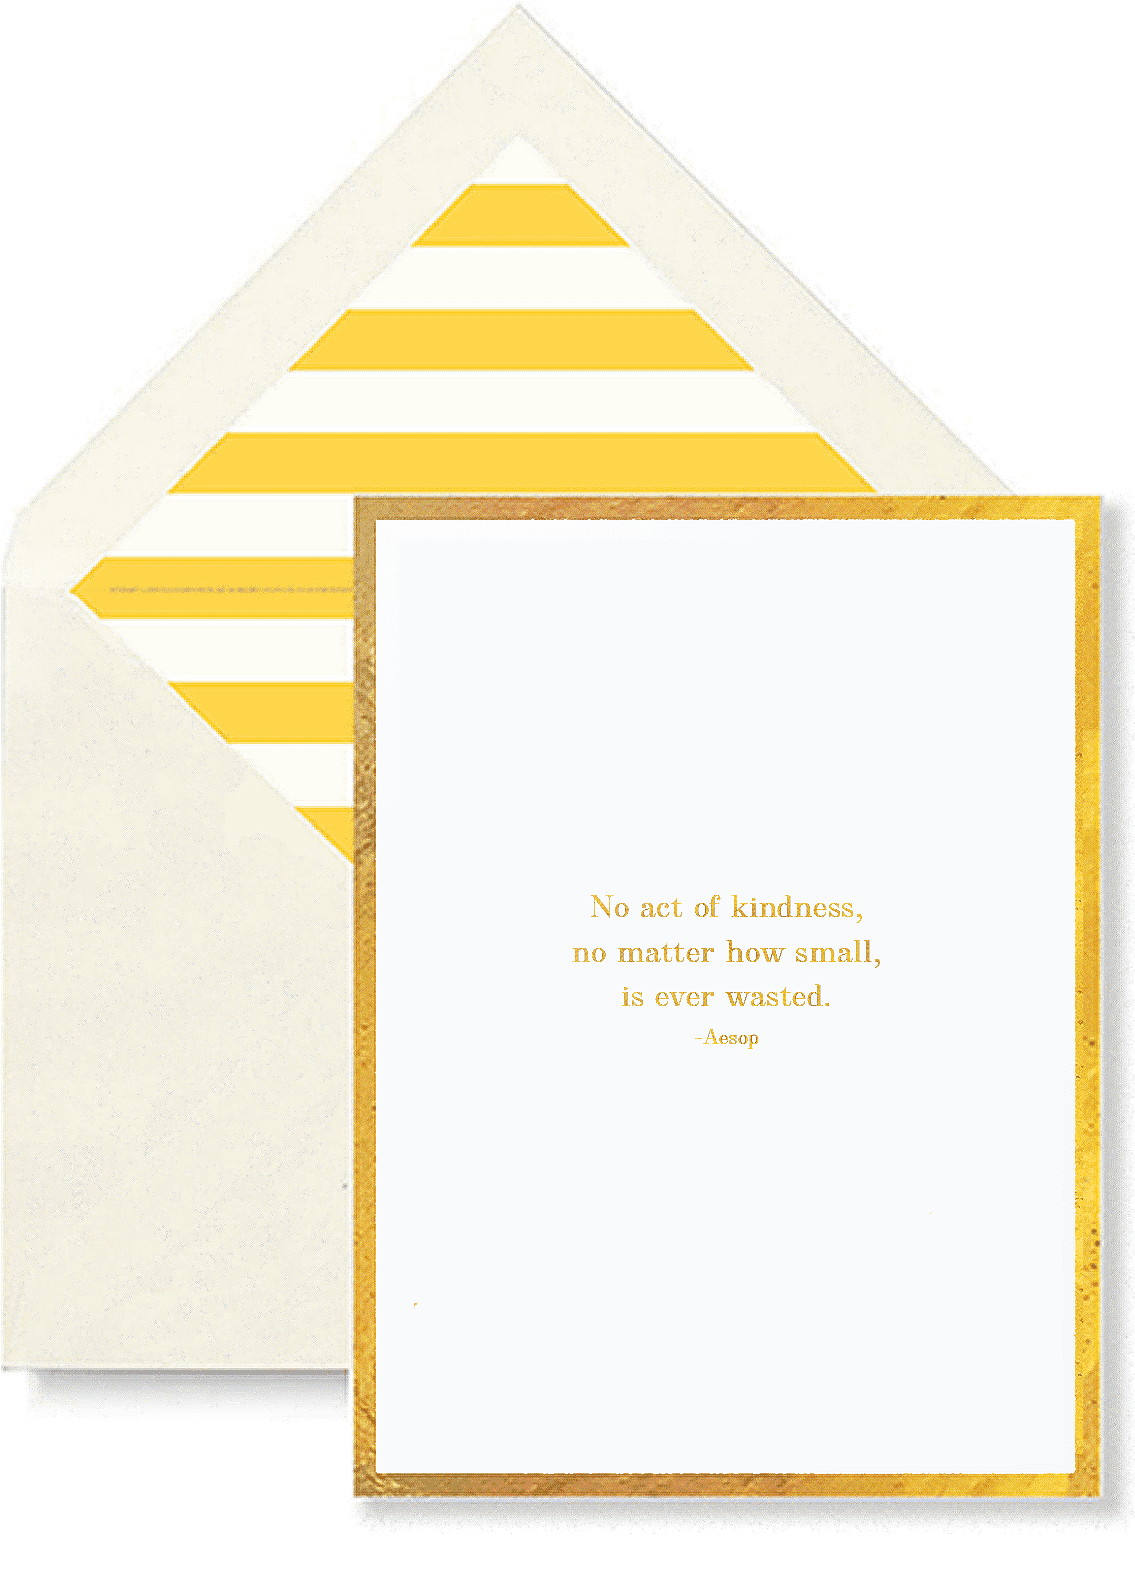 A Yellow And White Striped Envelope With A White Card